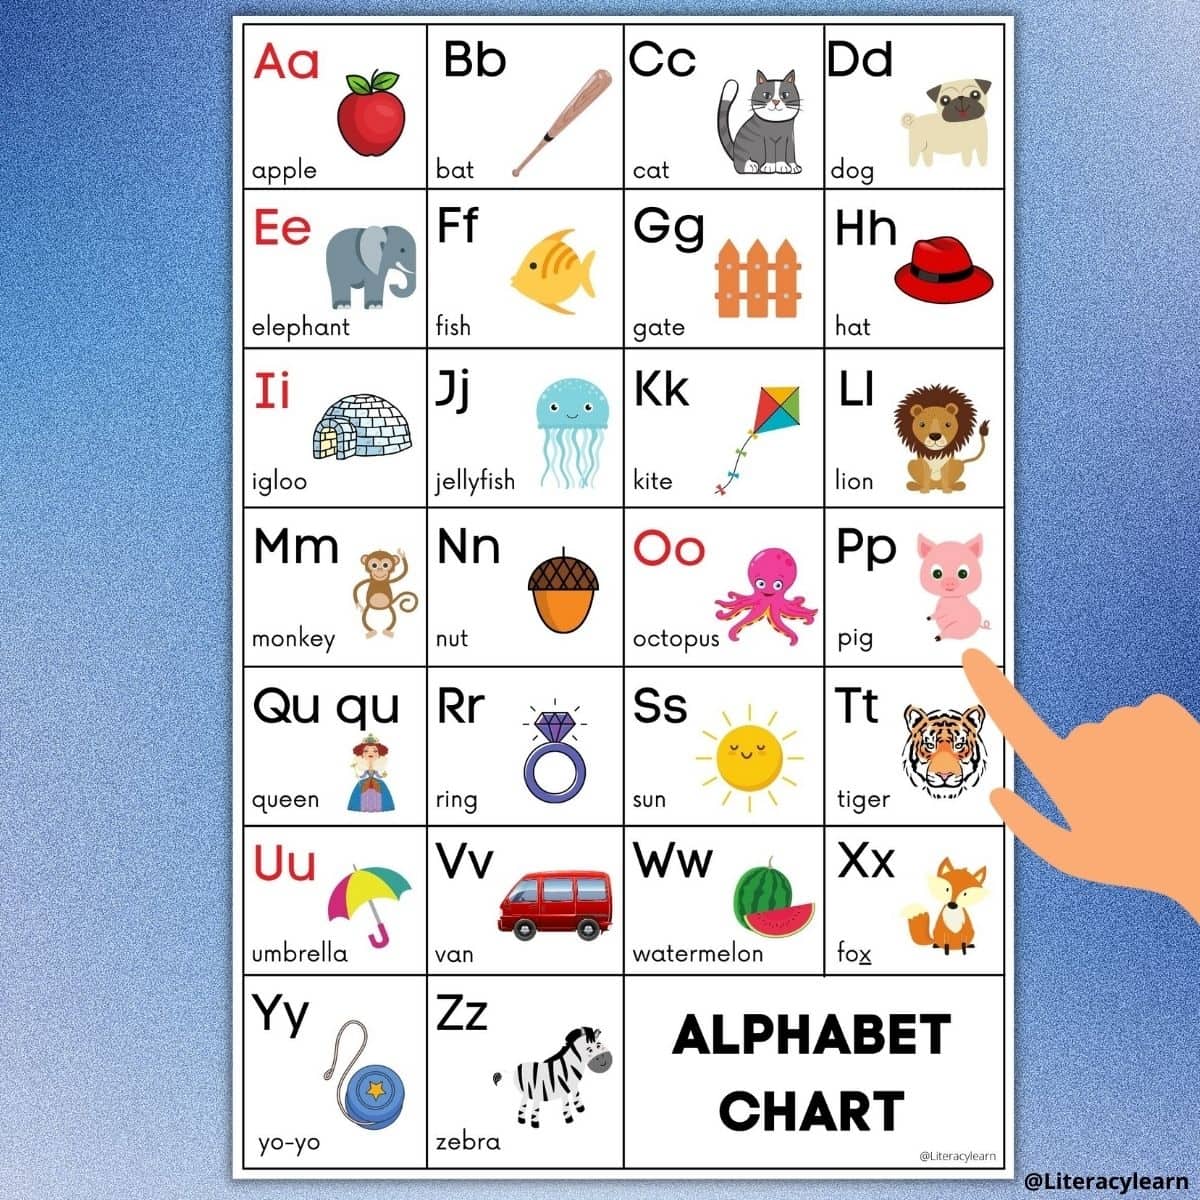 A large ABC chart with letters A-Z, pictures, and keywords on a blue background.